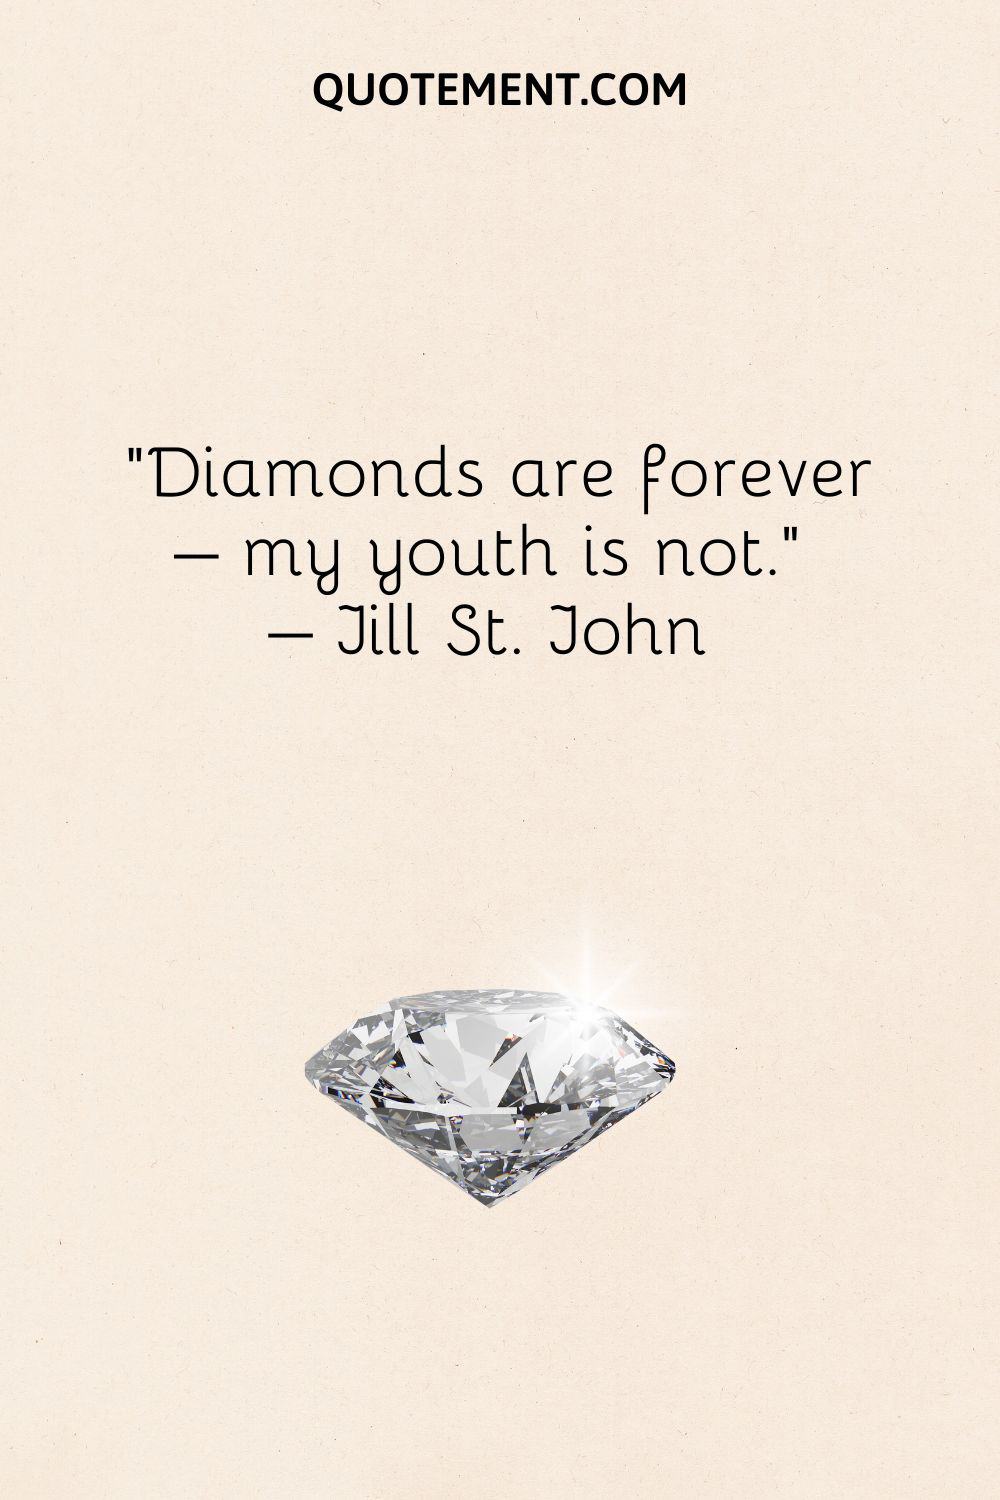 Diamonds are forever – my youth is not.